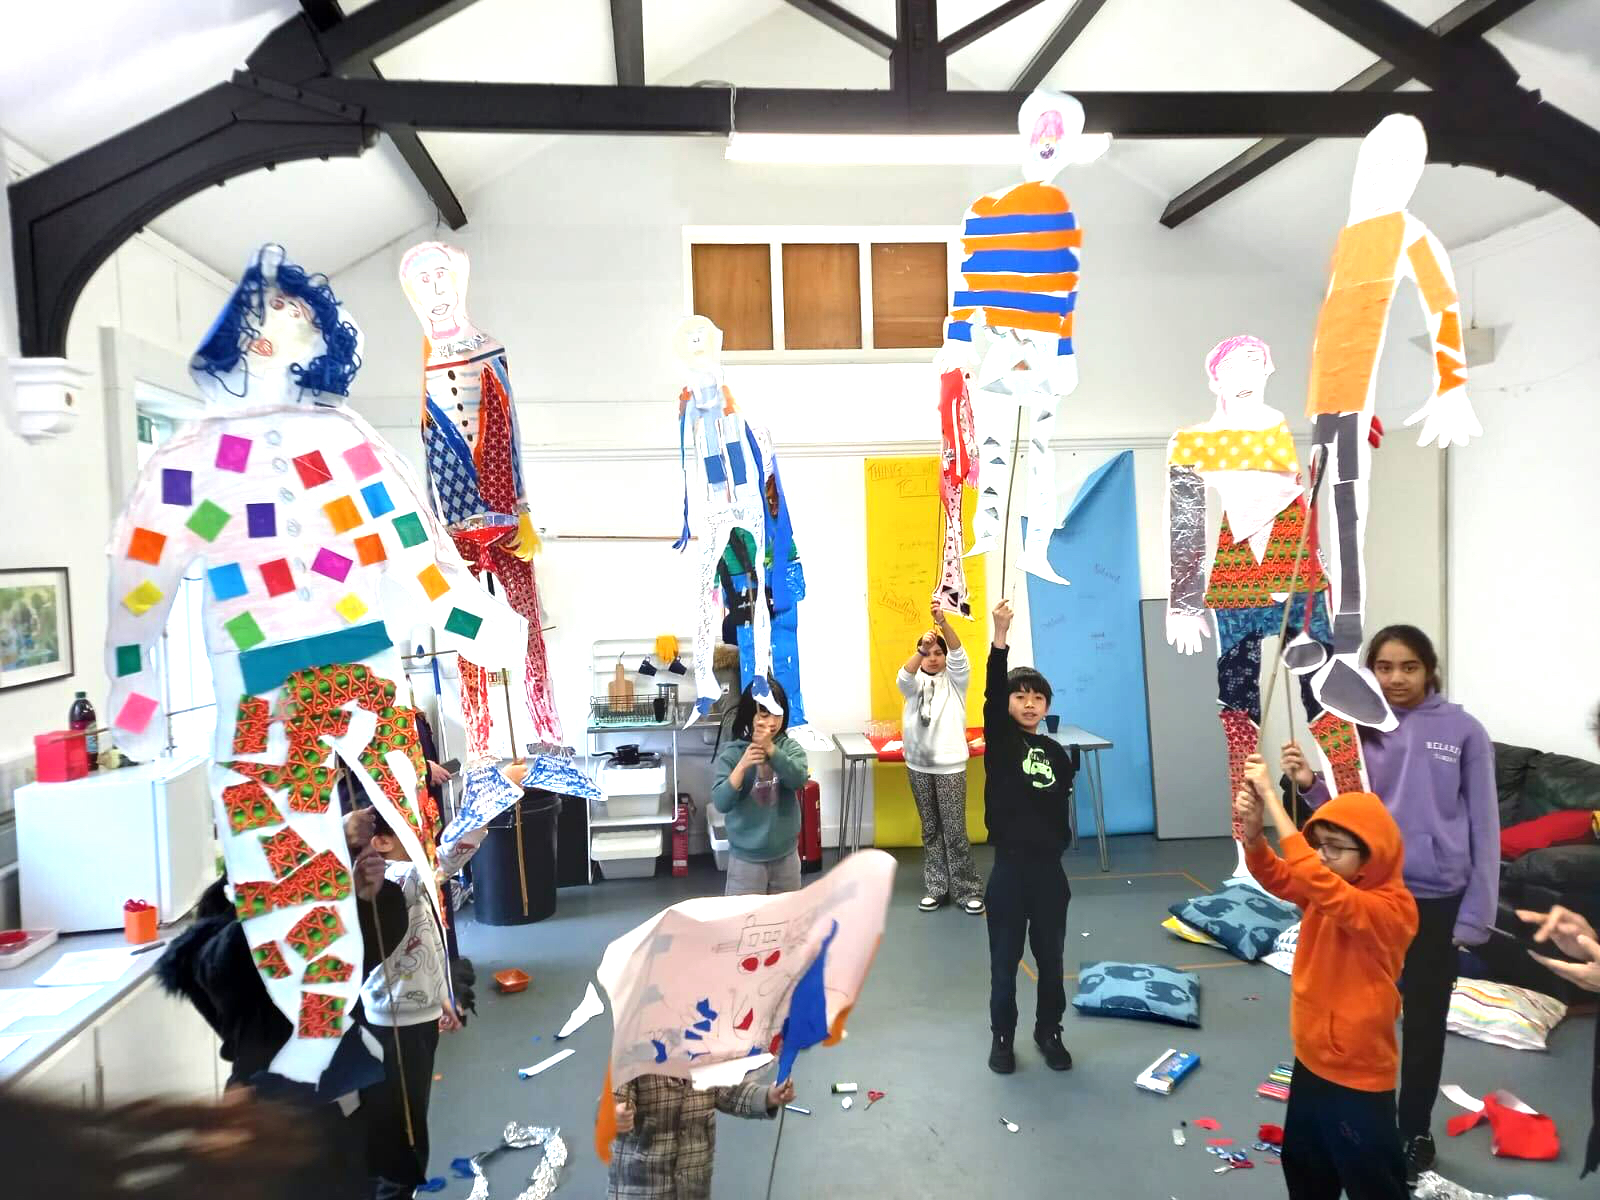 Photograph of a group of children holding their life-size colourful mannequins, during a creative workshop, indoors.